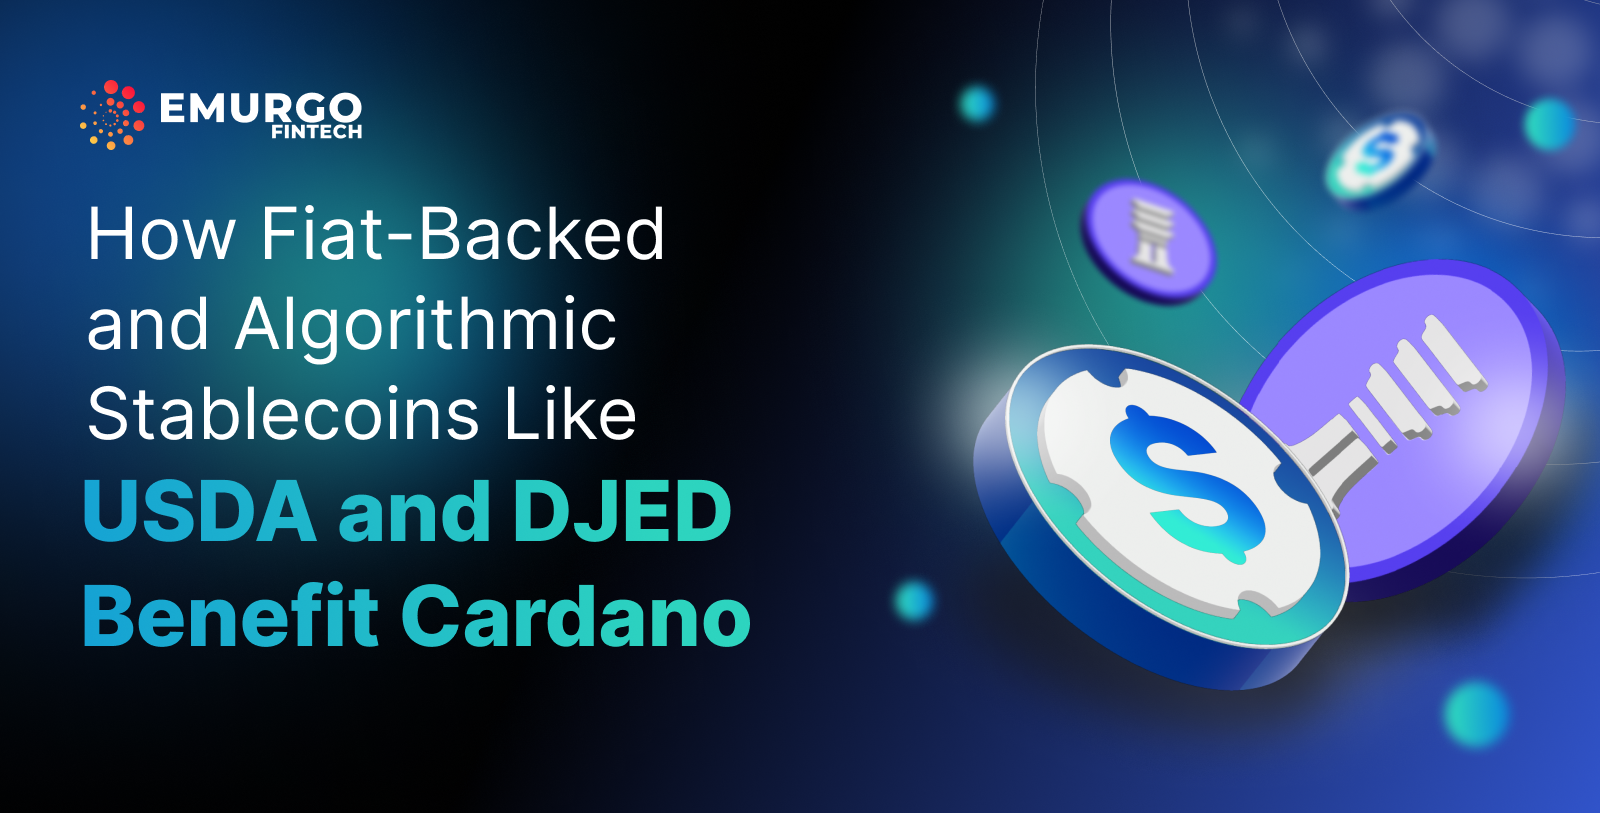 How Fiat-Backed and Algorithmic Stablecoins Like USDA and DJED Benefit Cardano